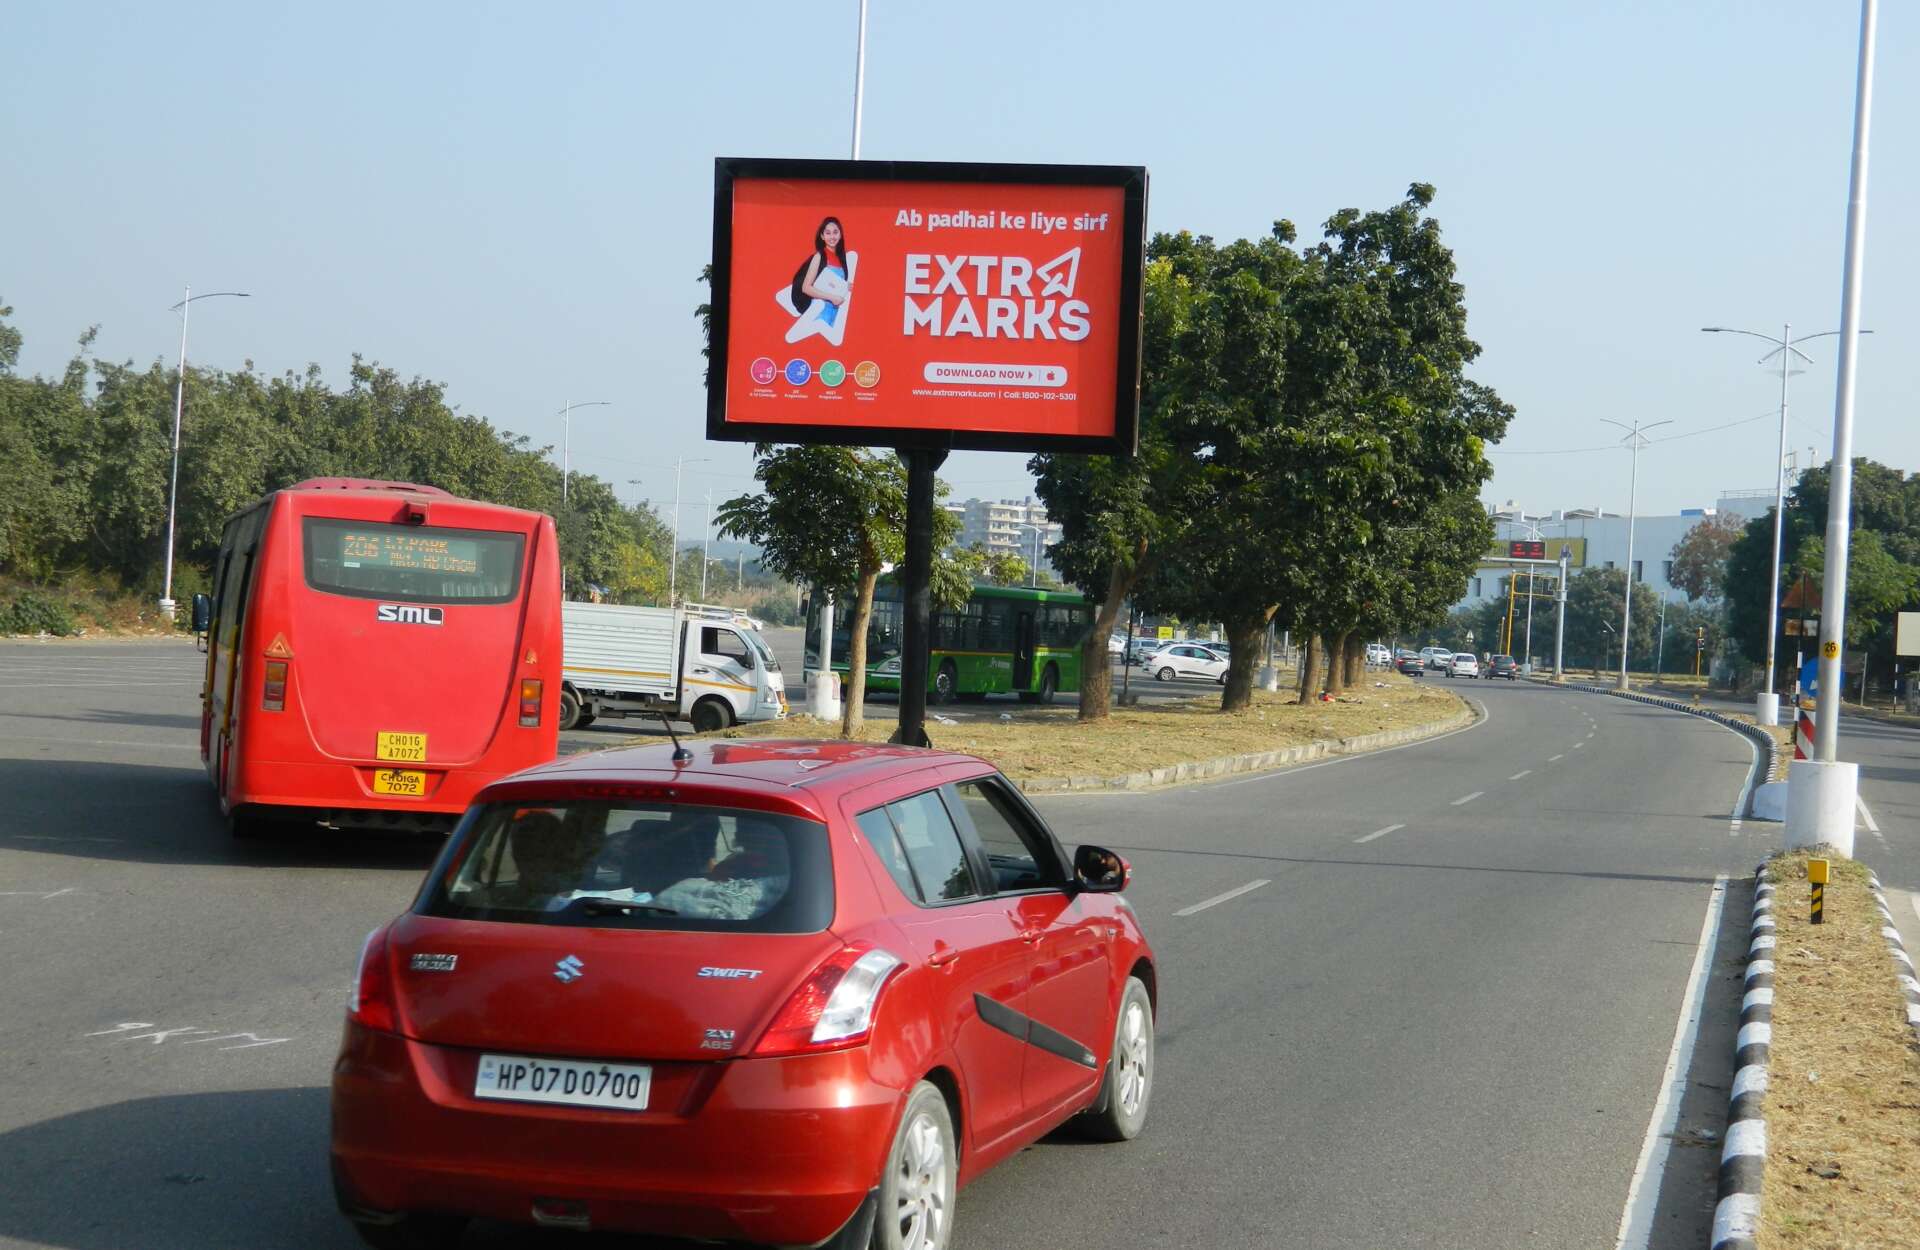 Hoarding advertisement at Elante Mall Chandigarh of Extra Marks